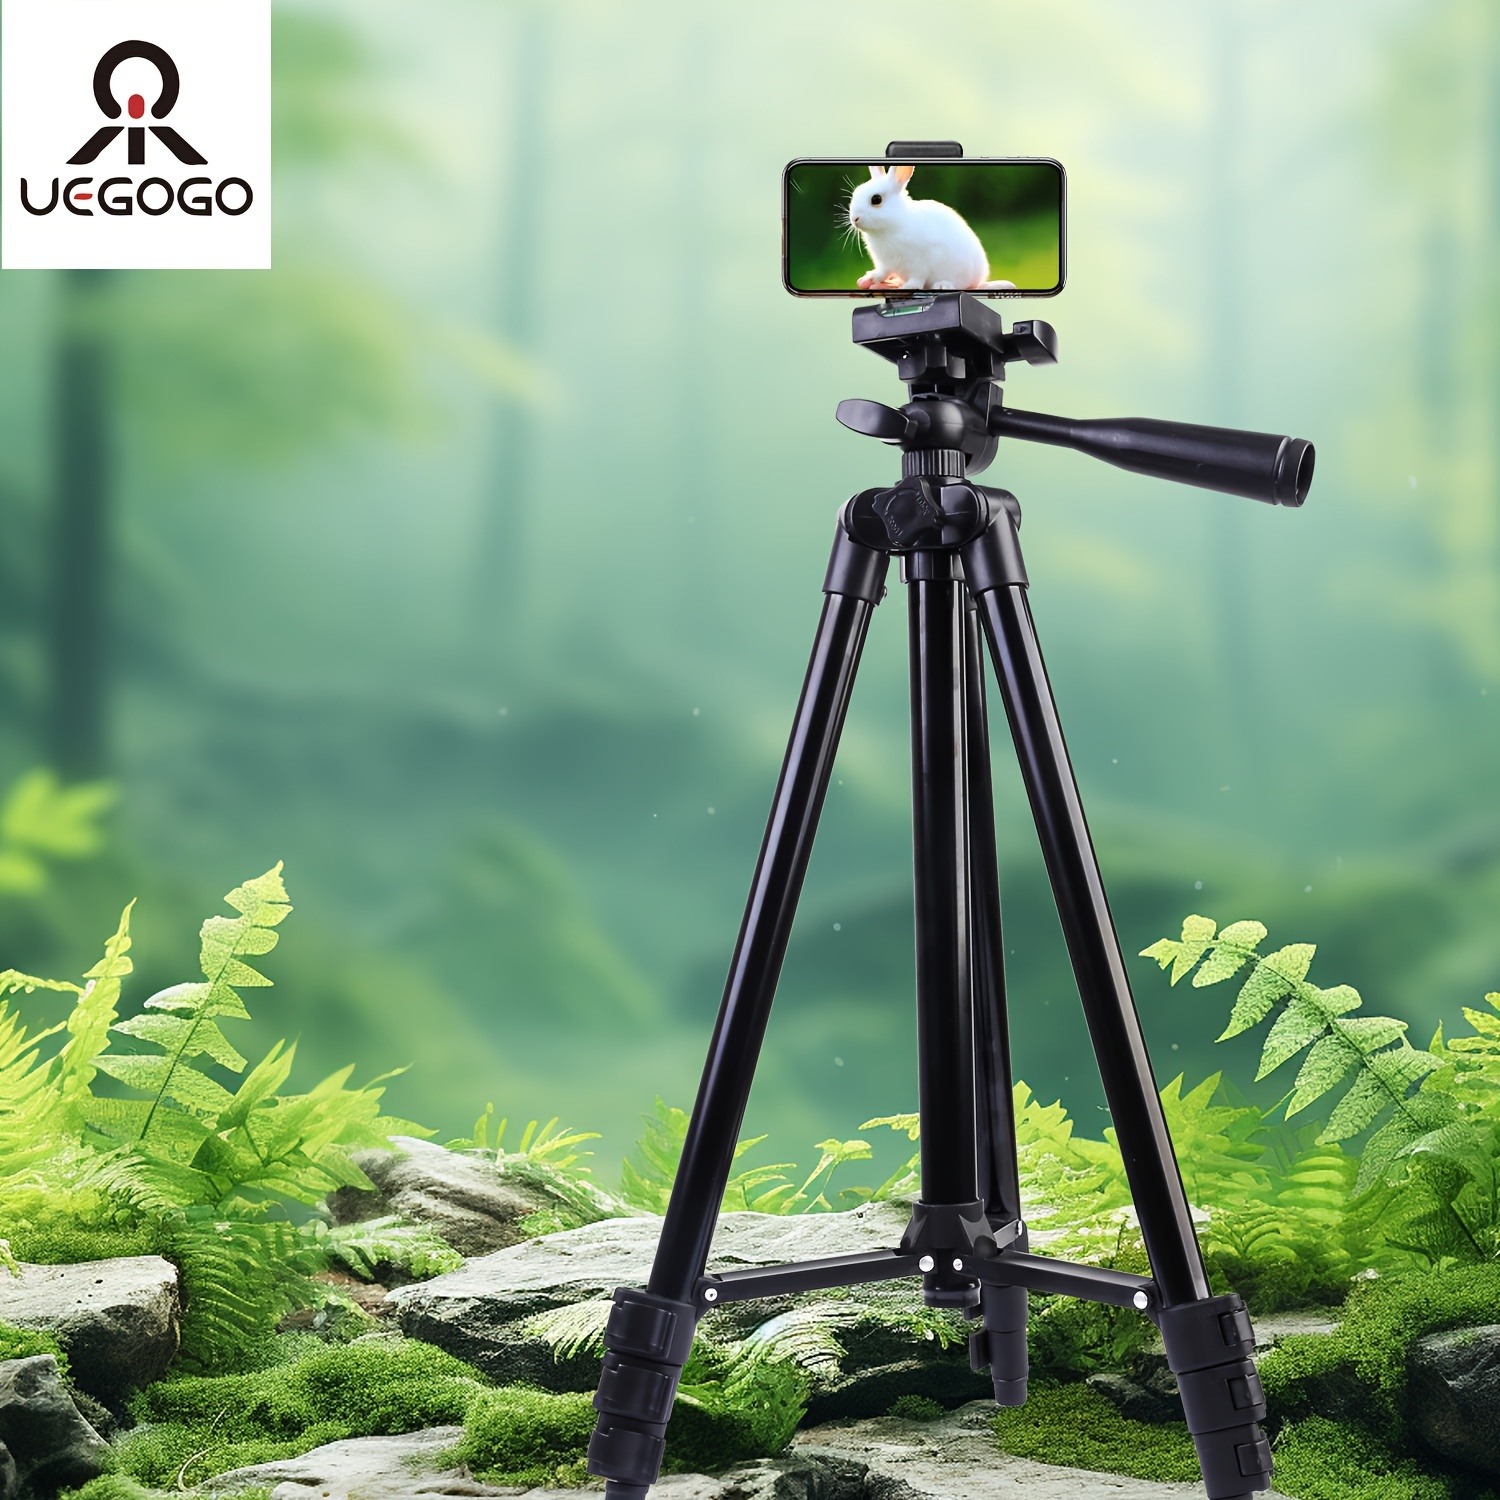 

55-inch Lightweight Camera Mount Tripod Stand With Bag, For Outdoor Travel, Shooting, Video